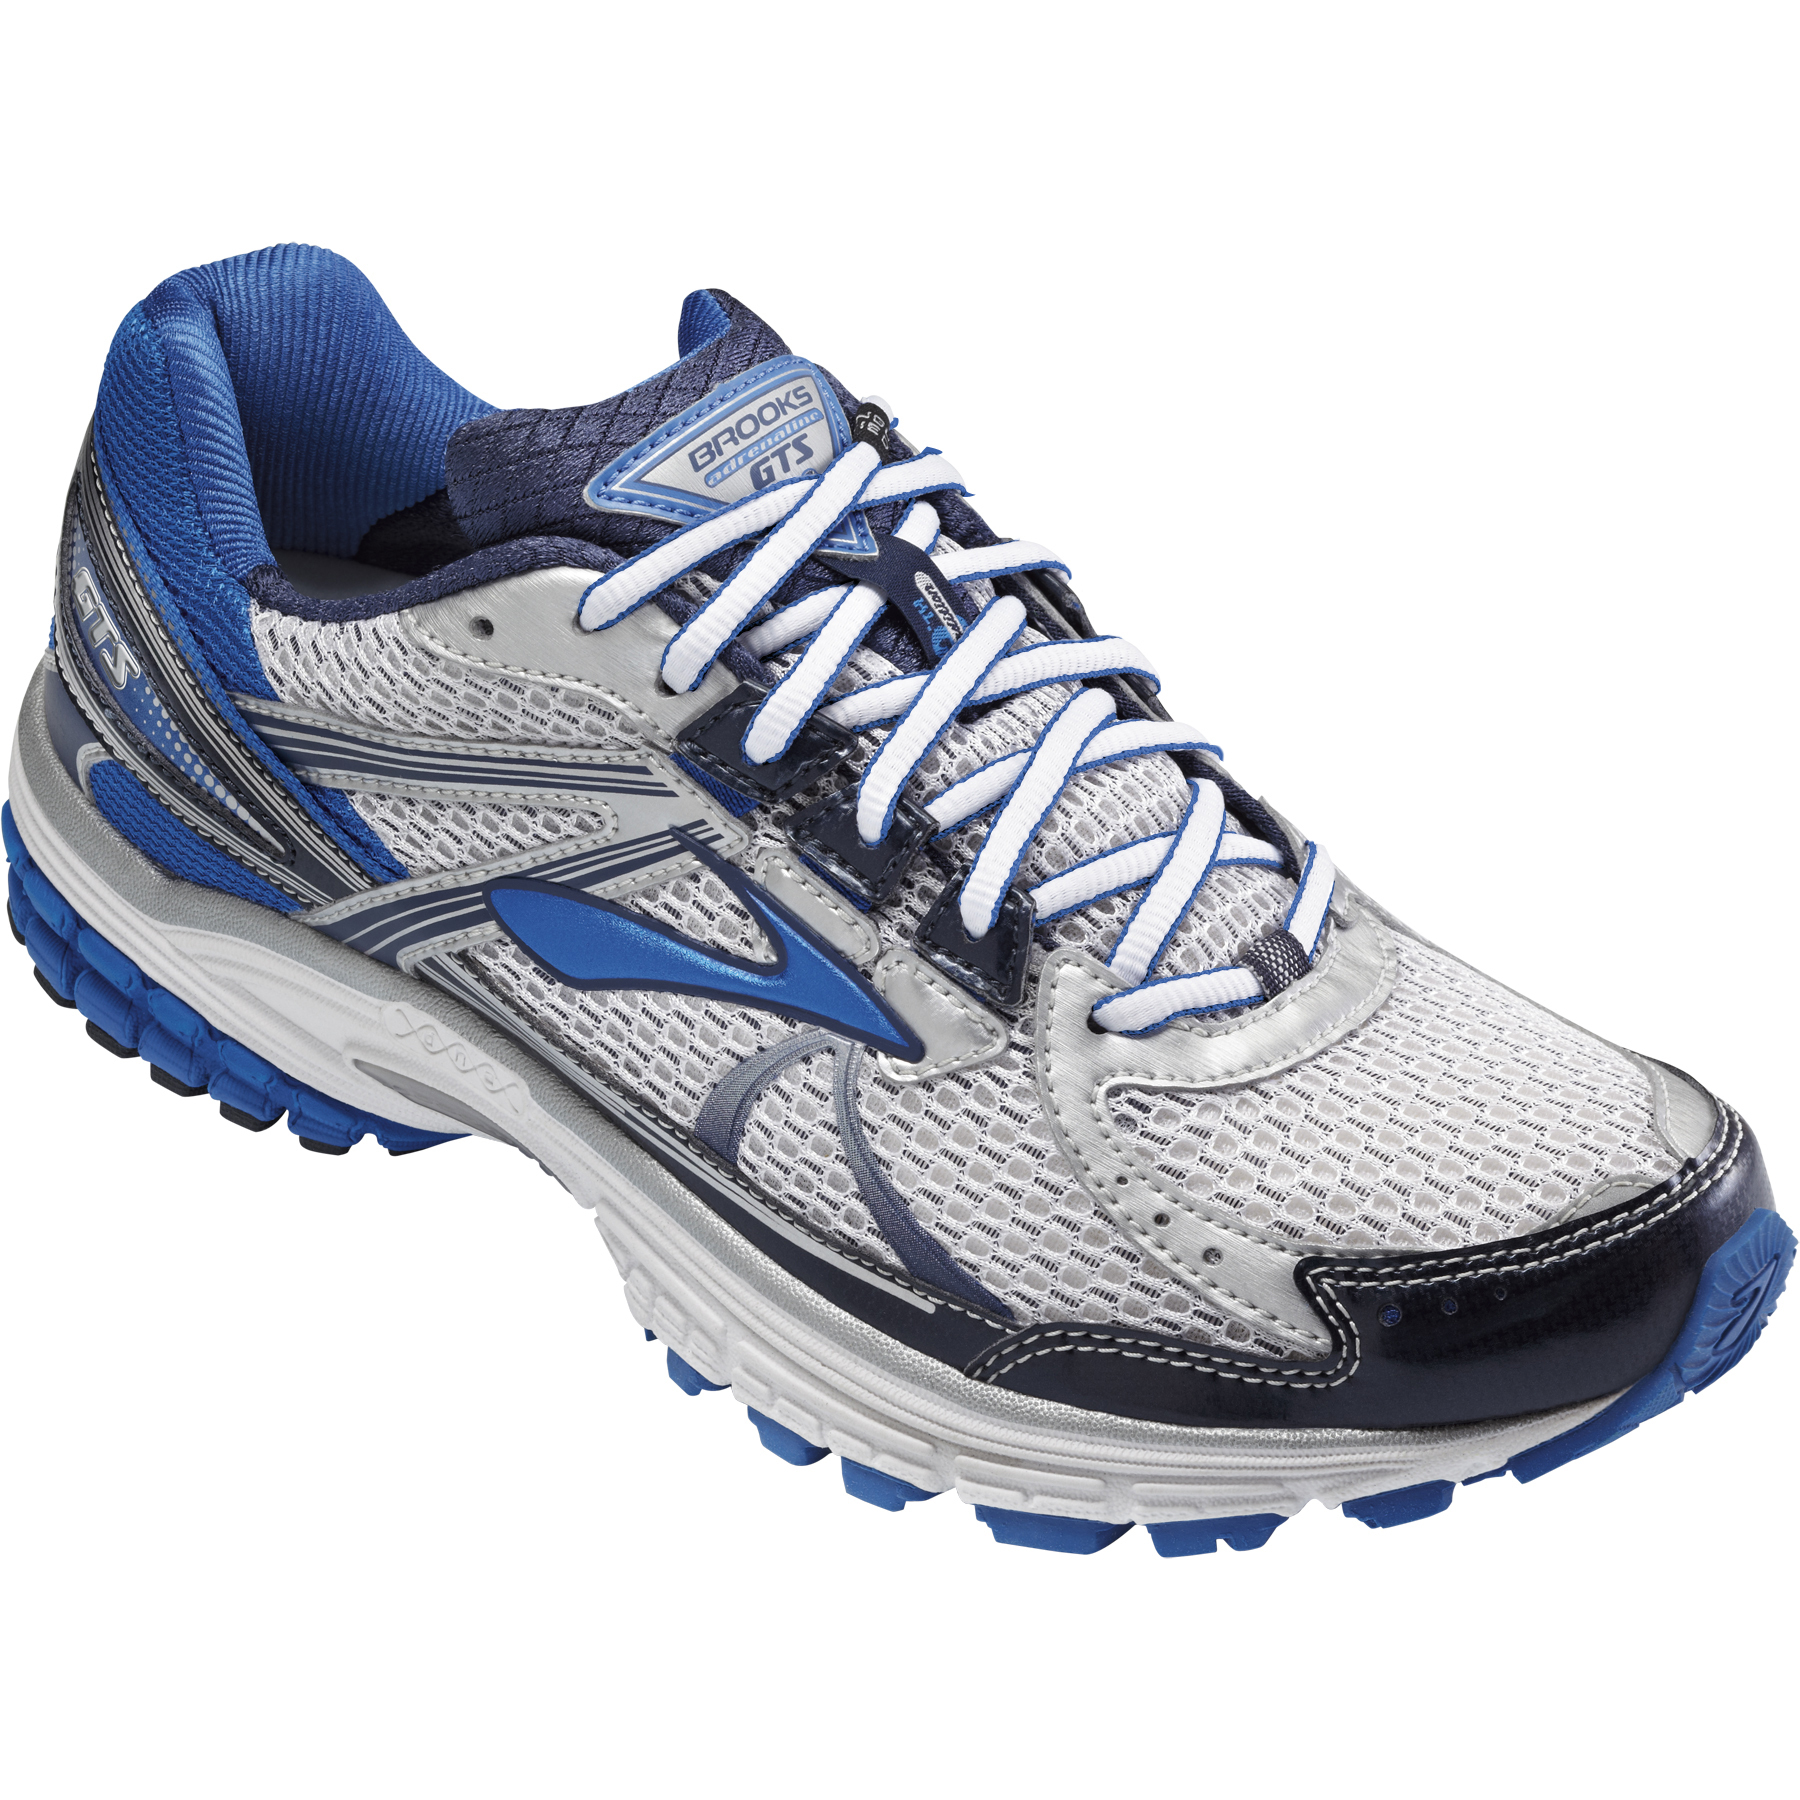 Brooks Sports Selects PTC PLM Footwear and Apparel Technology